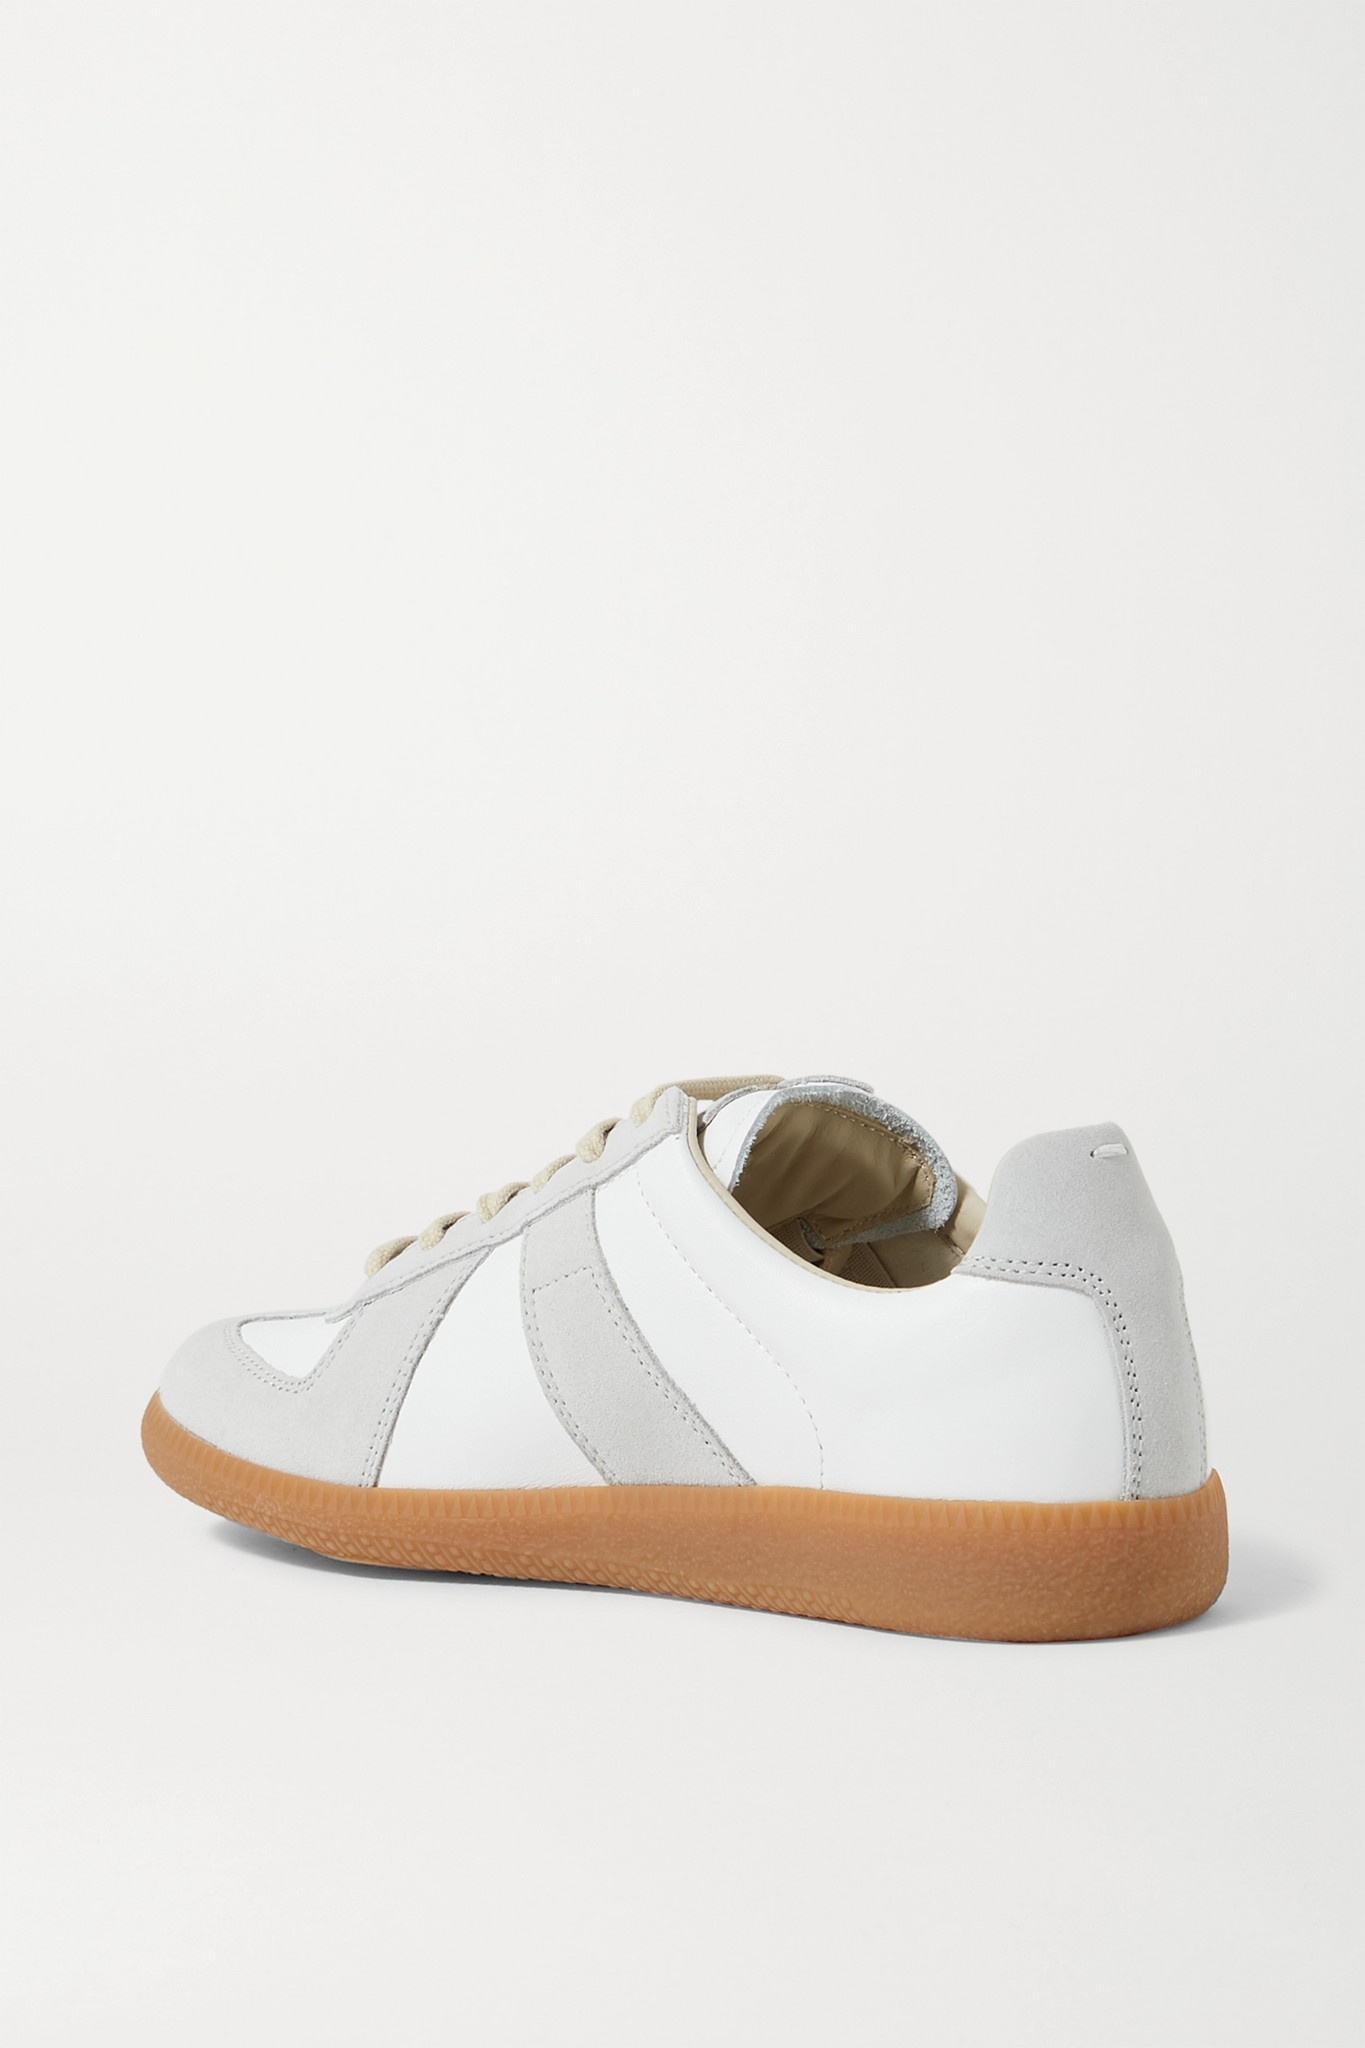 Replica leather and suede sneakers - 3